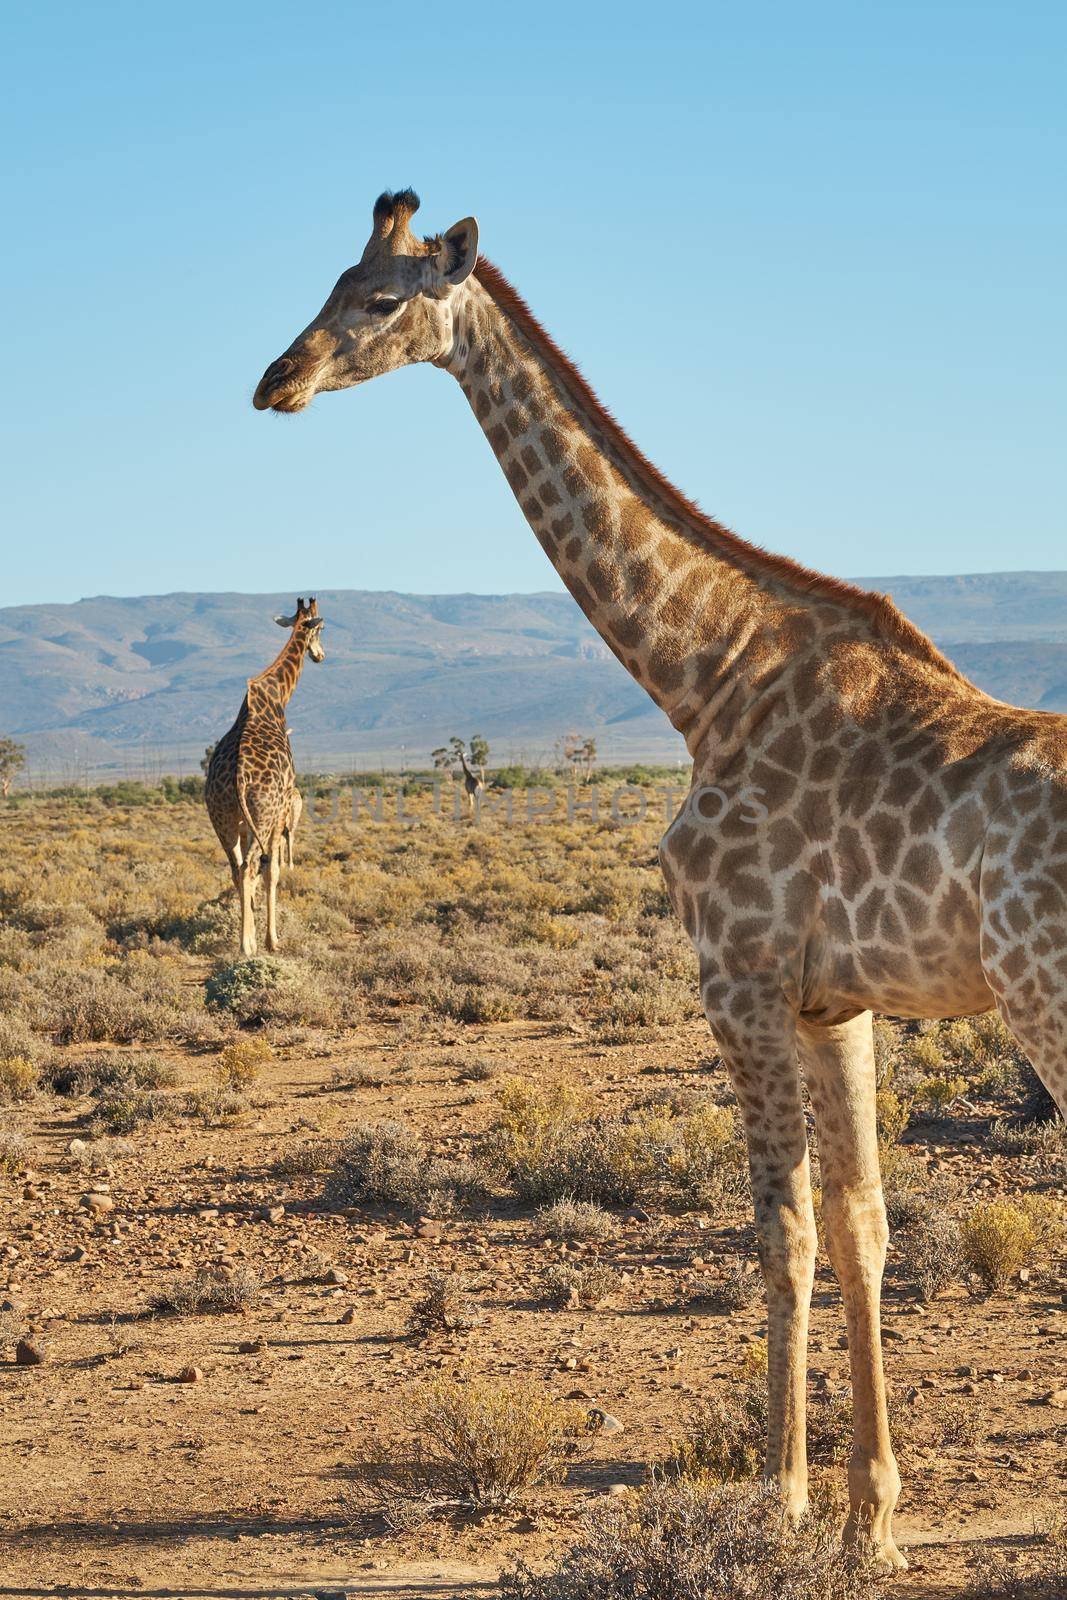 Giraffes in the safari outdoors in the wild on a hot summer day. Wildlife conservation national park with wild animals walking on dry desert sand in Africa. A long neck mammal in the savannah region.